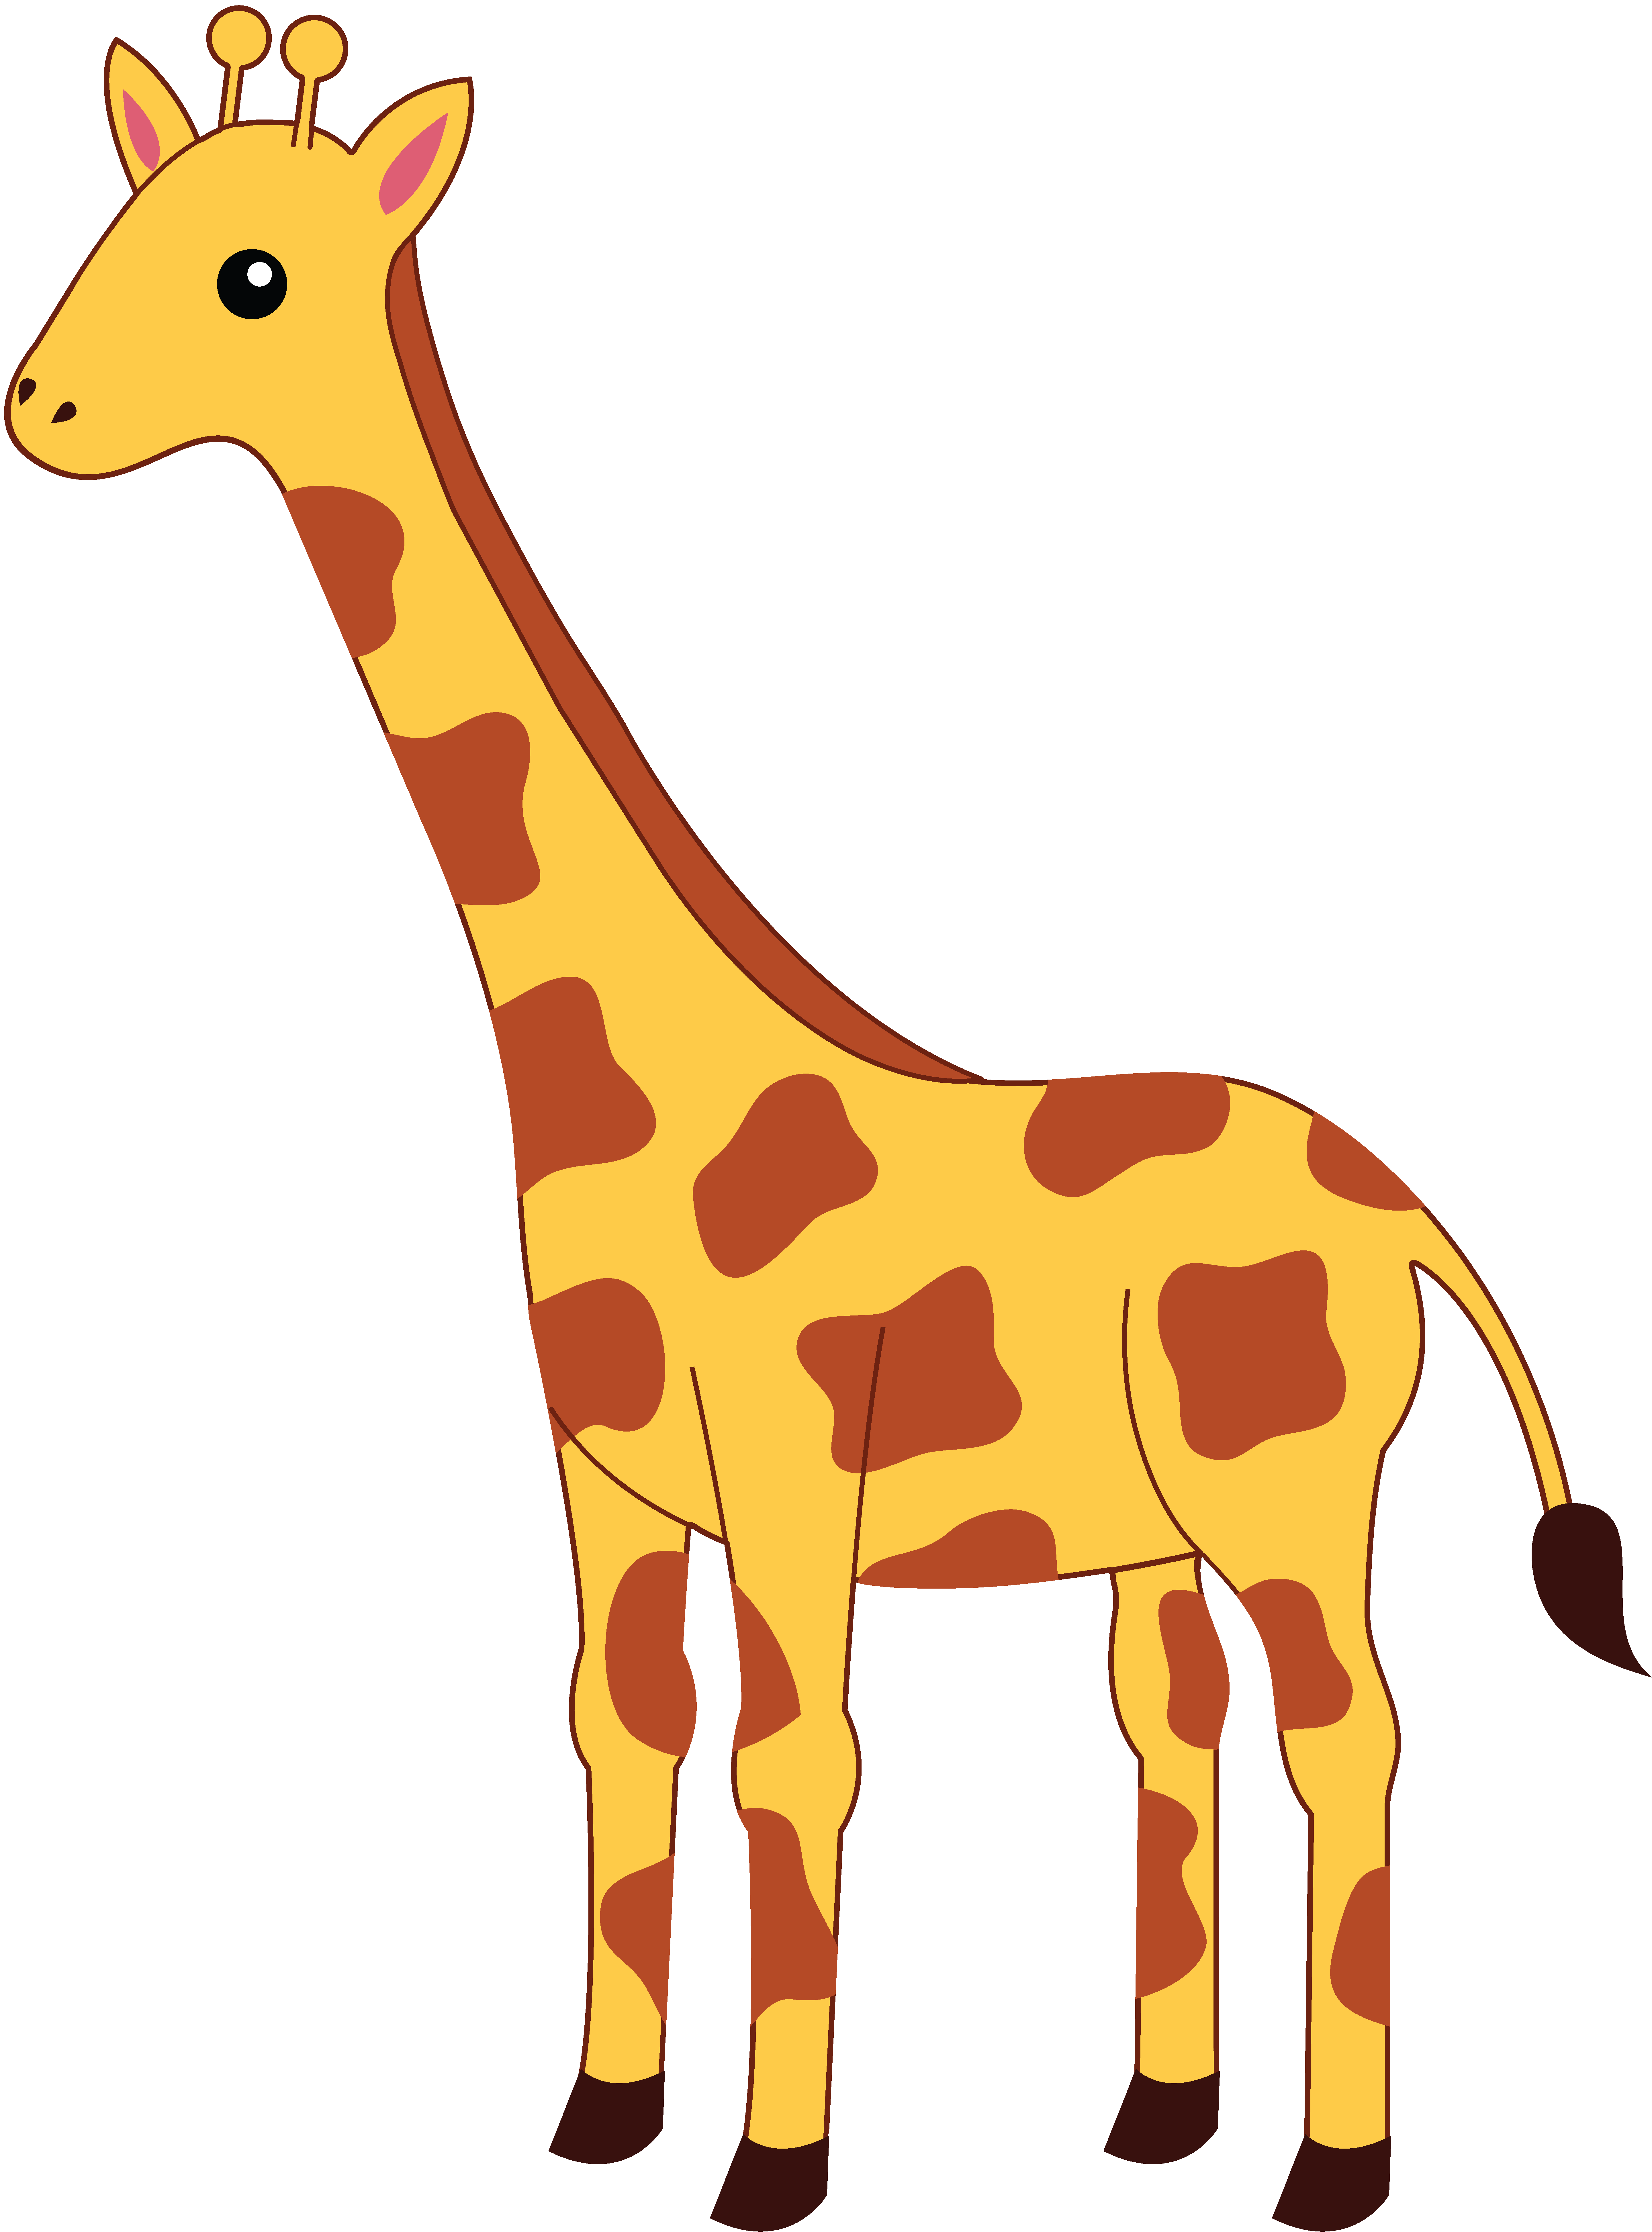 Download this Giraffe Clip Art collection picture, image, photo and wallpaper for free that are delivered in high definition, 0x0 Pixel.